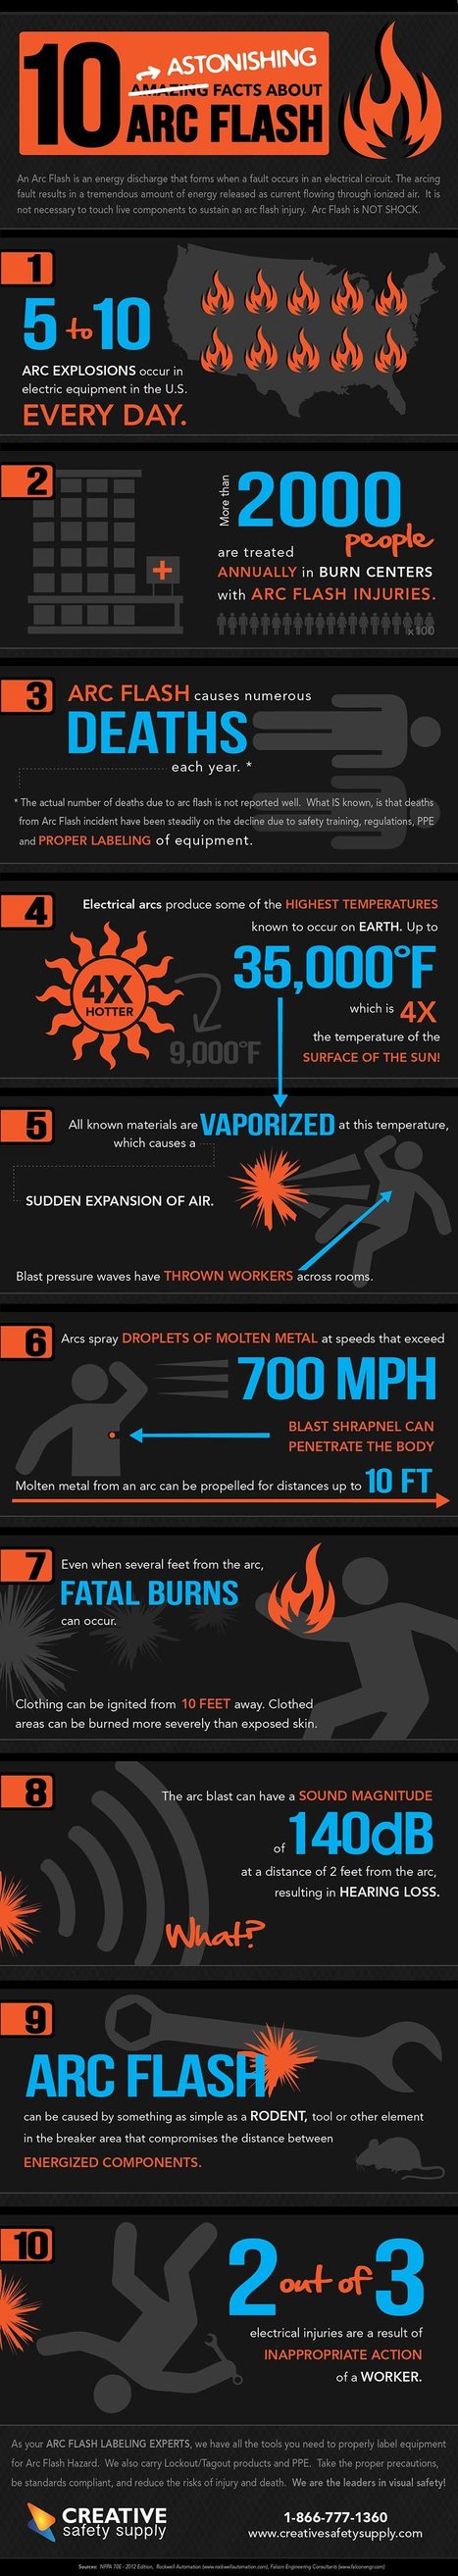 Top 10 Astonishing Facts about Arc Flash | All Infographics | Scoop.it